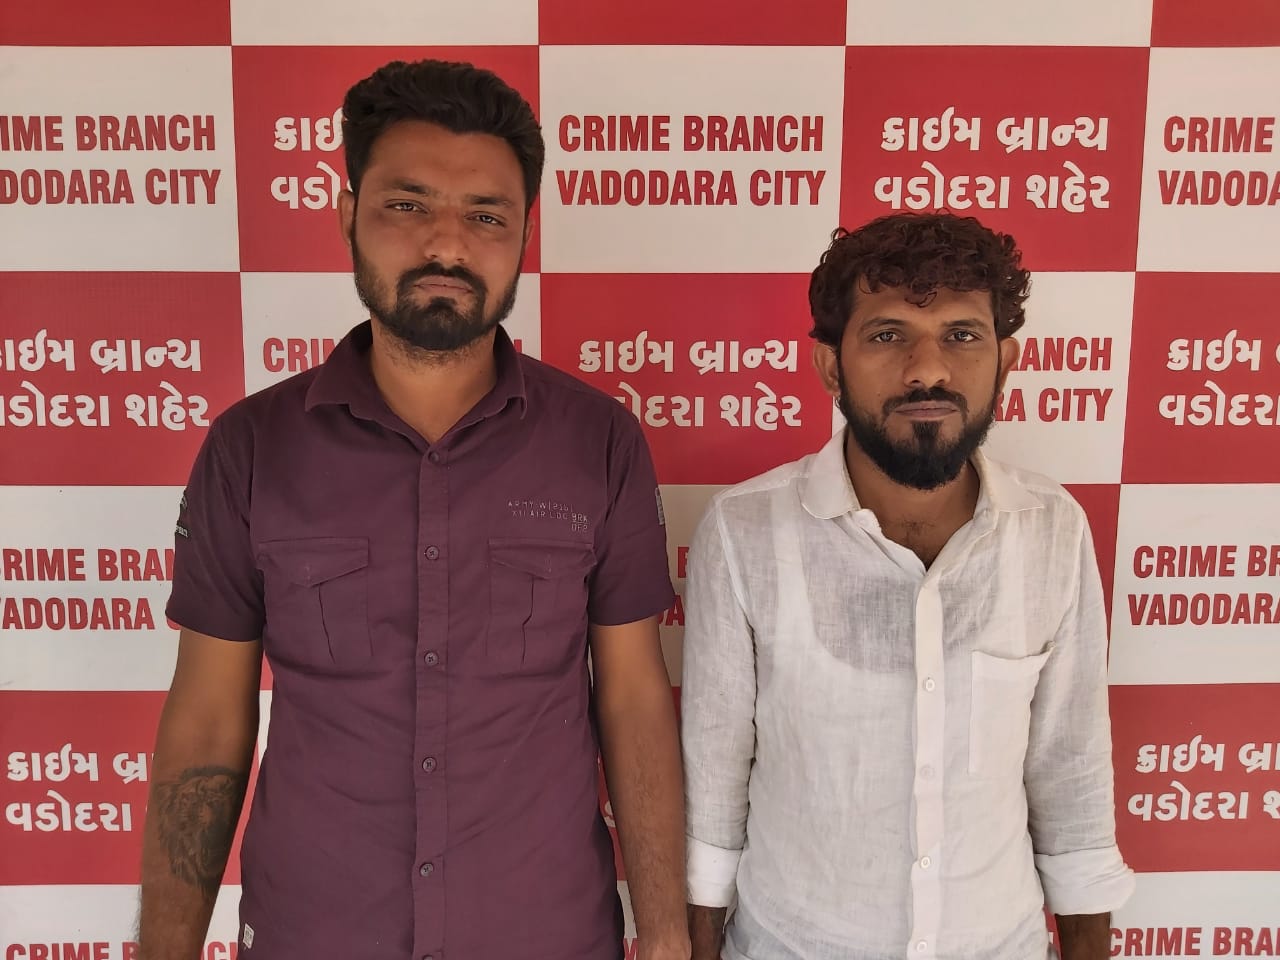 Vadodara crime branch arrested two associates for threatening the trustee of Parul University